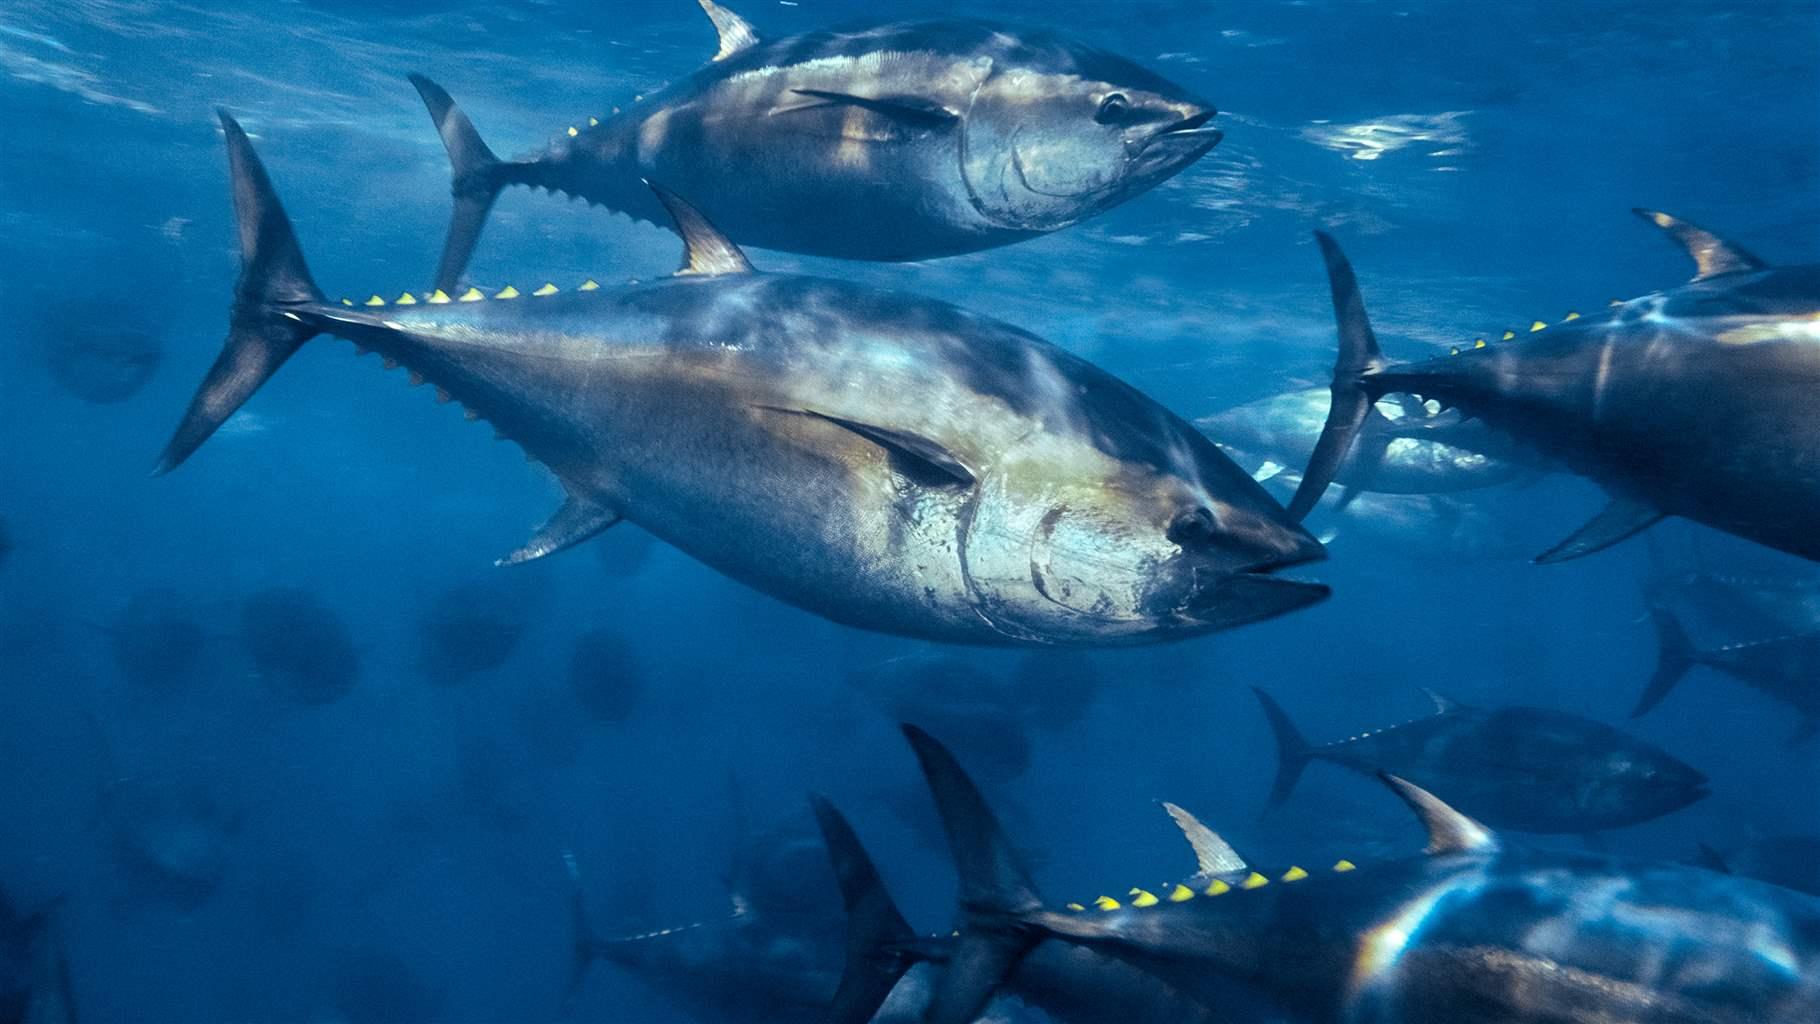 Pacific Fisheries Managers Must Improve Sustainability and Stem Illegal Fishing. The Pew Charitable Trusts